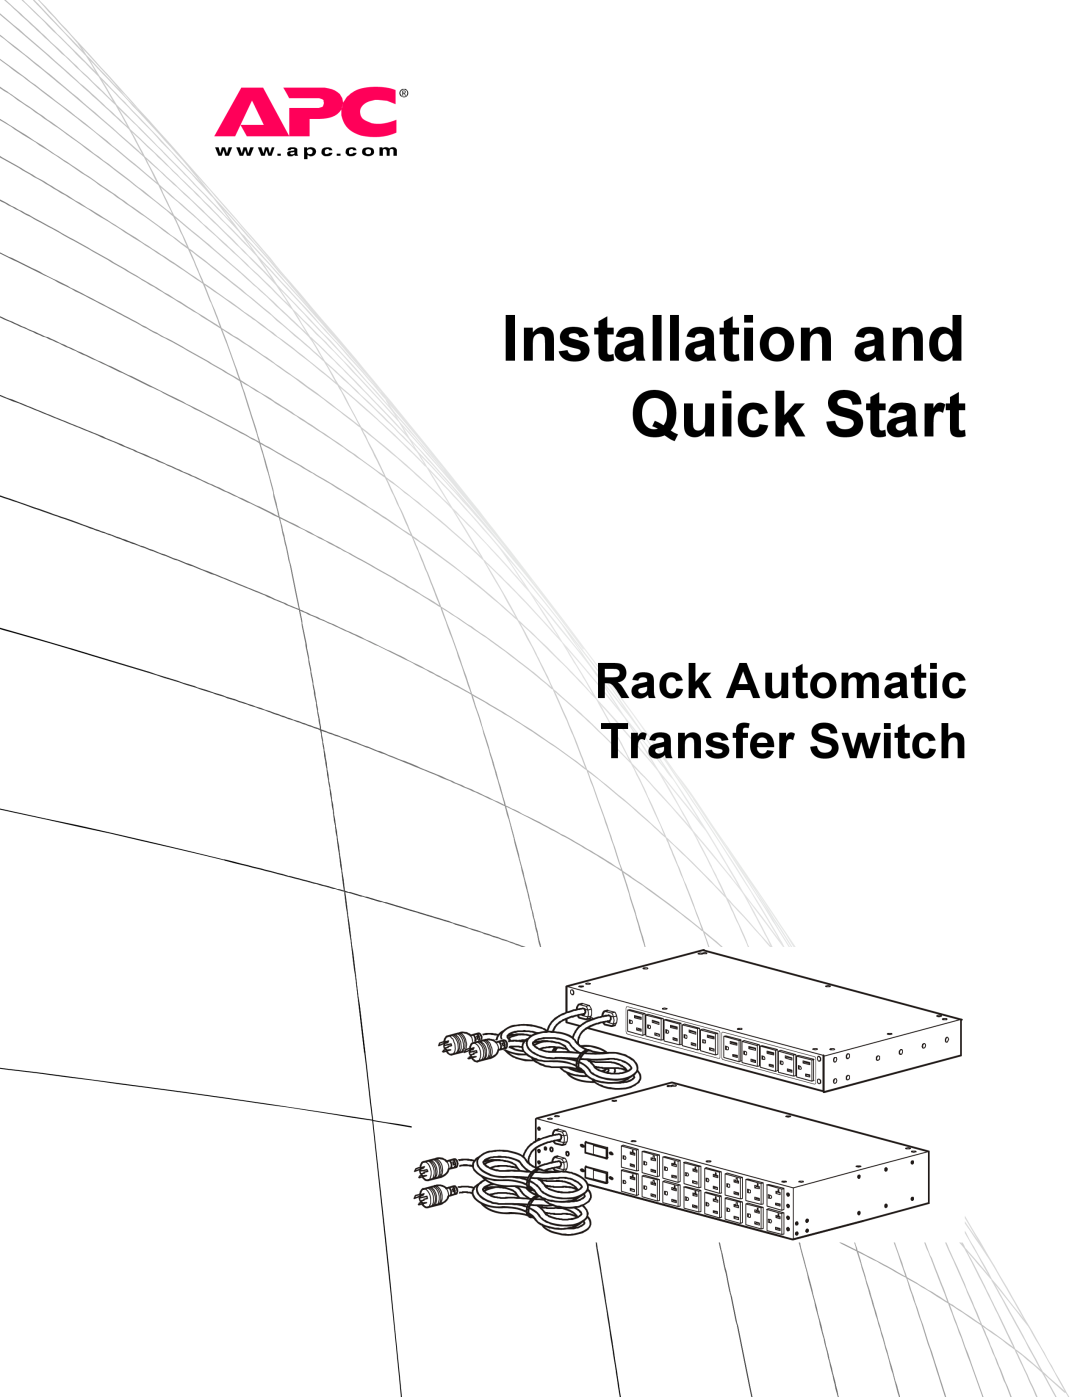 APC AP7752 quick start Installation and Quick Start, Rack Automatic Transfer Switch 